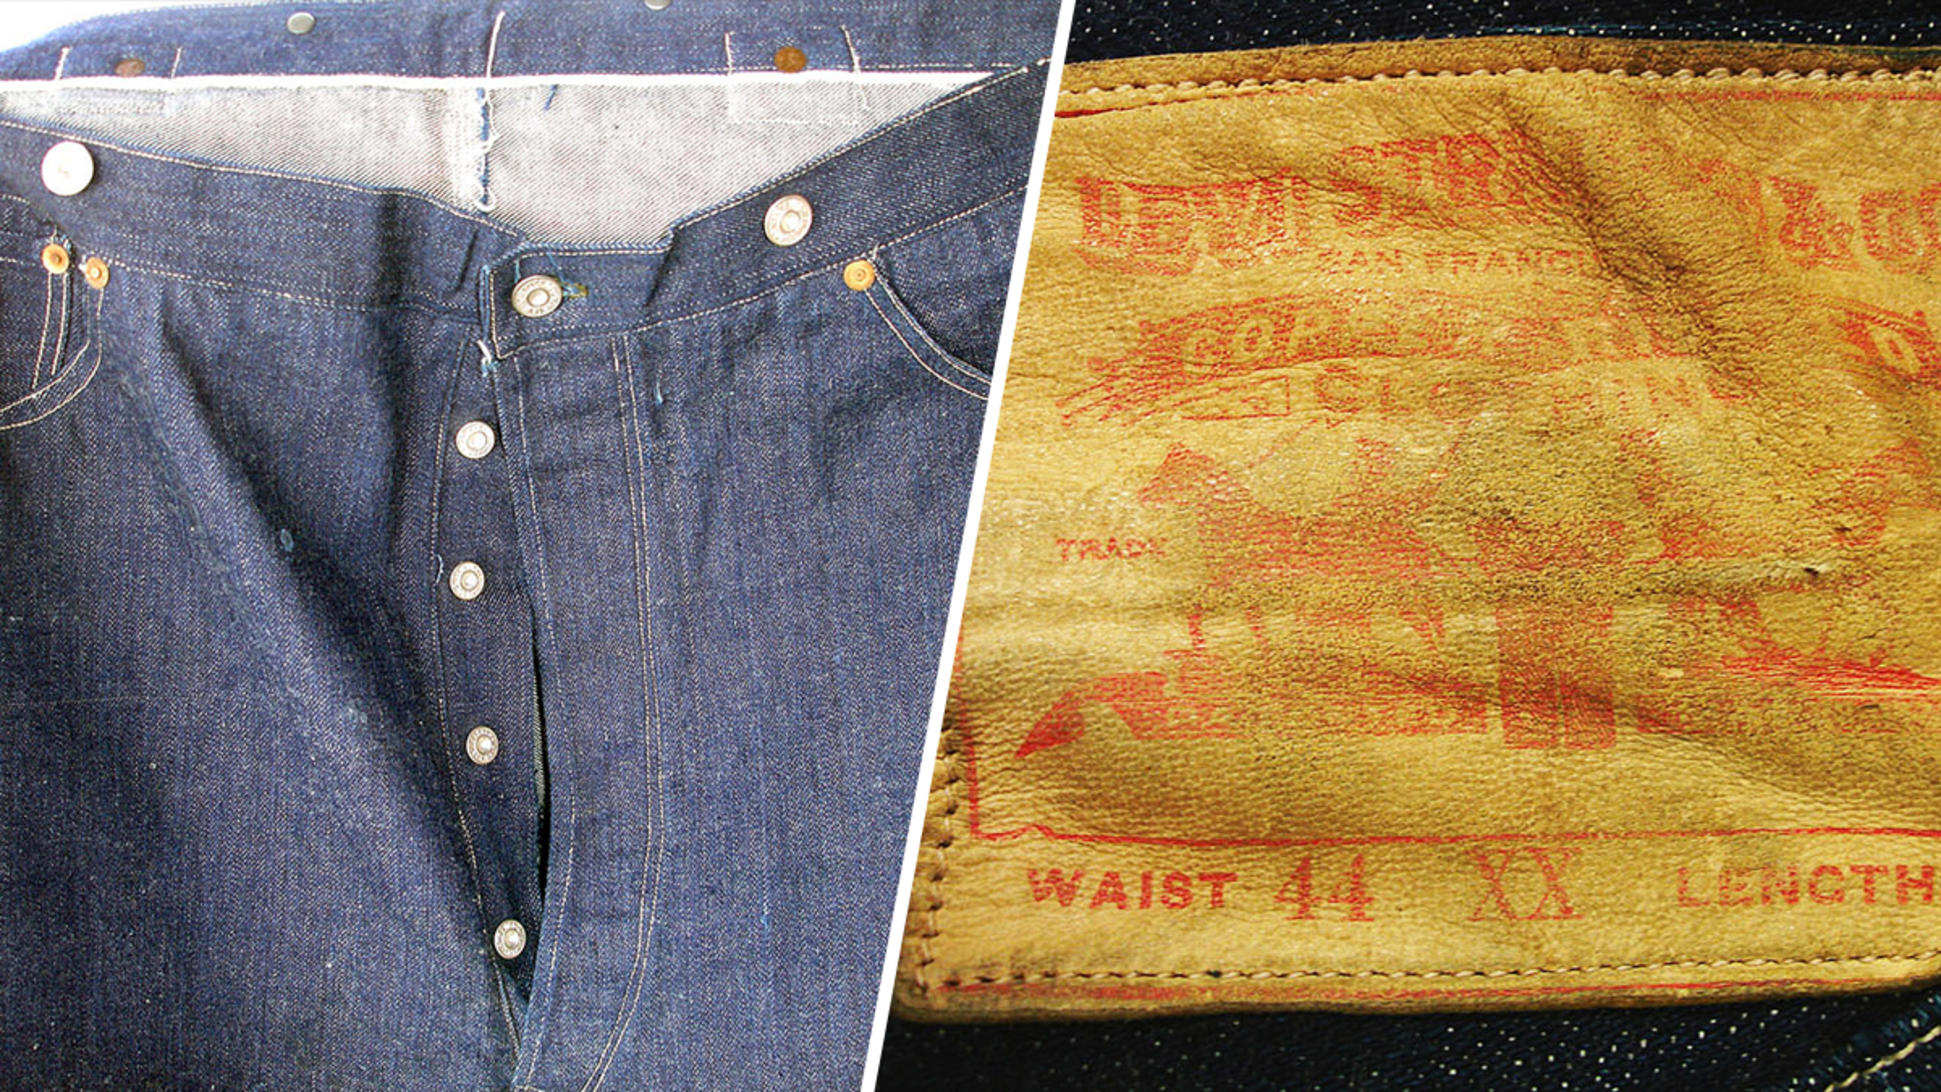 Vintage denim jeans, 125-year-old jeans, Levi Strauss, Auction house, Maine, United States, Weird news, Offbeat news